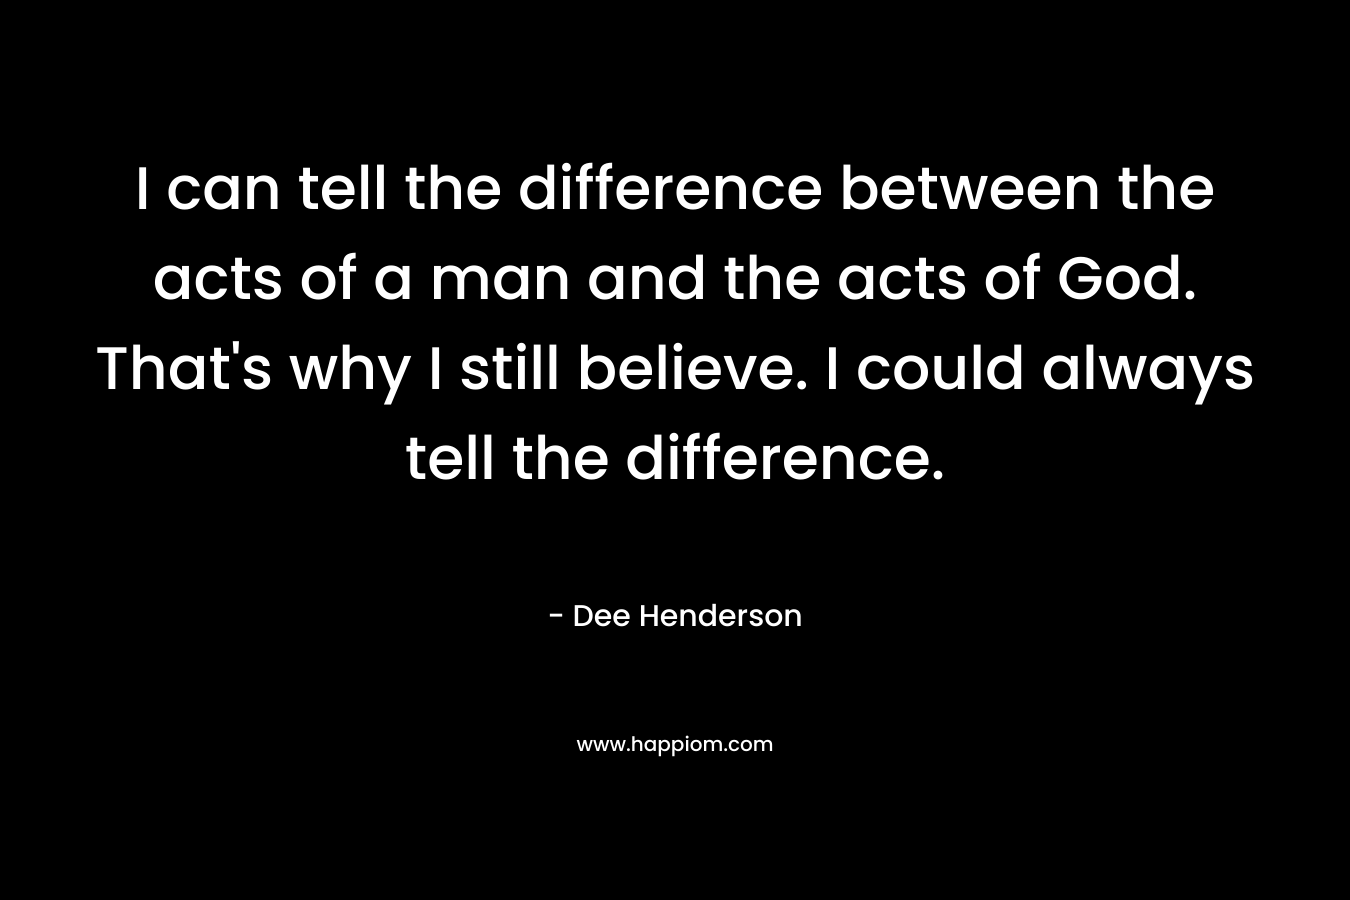 I can tell the difference between the acts of a man and the acts of God. That’s why I still believe. I could always tell the difference. – Dee Henderson